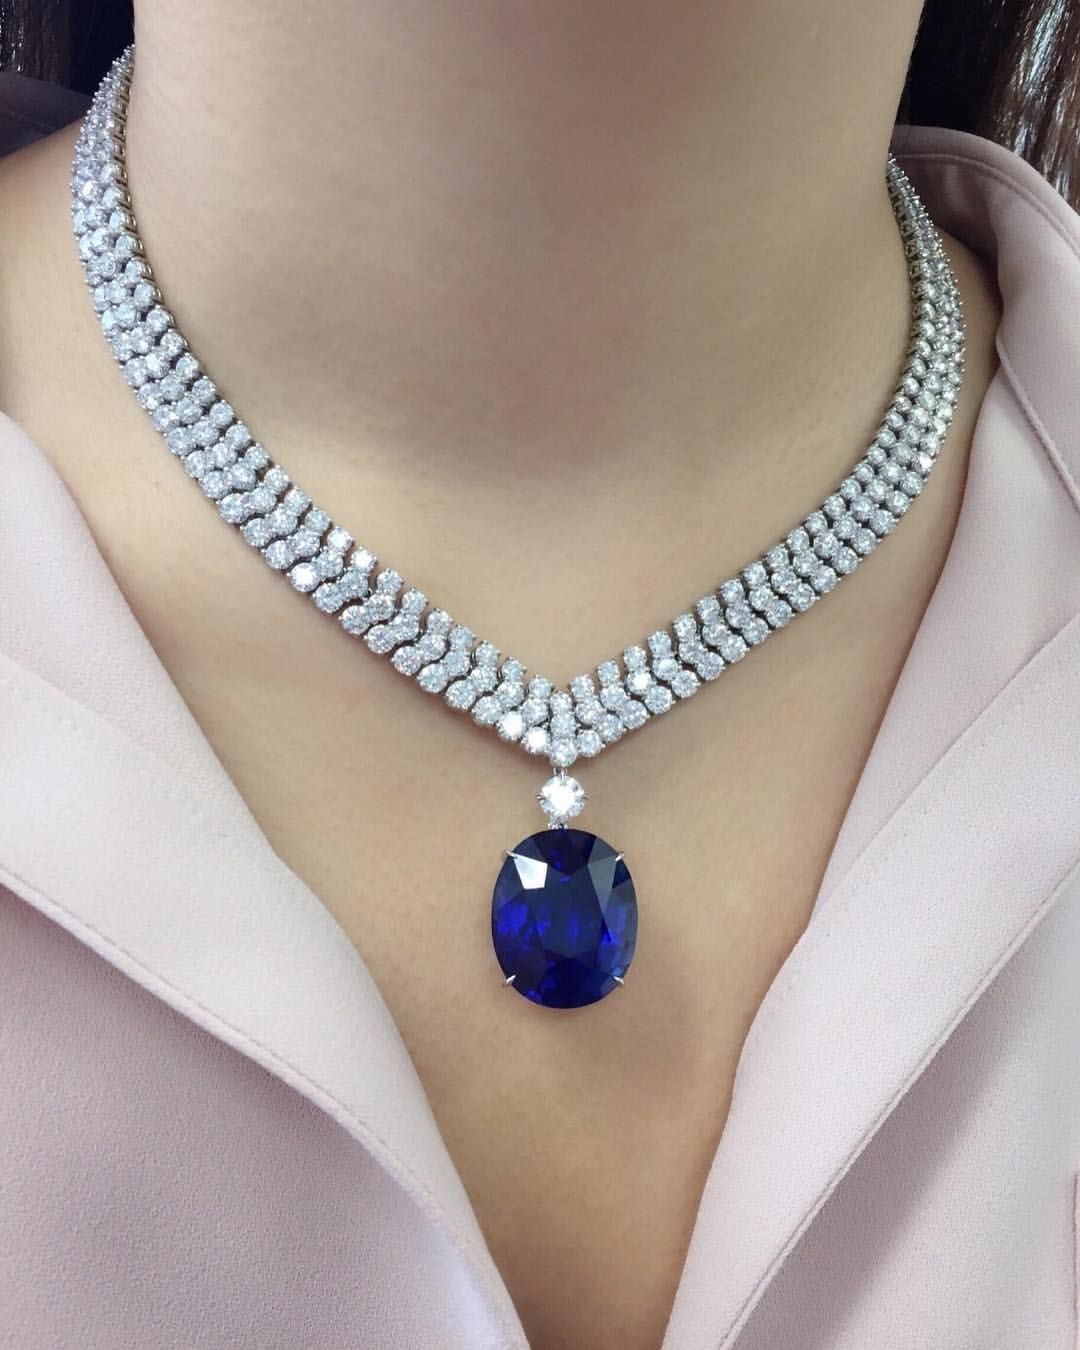 Christie's Jewellery on Instagram: “This stunning Burmese sapphire and diamond necklace will be offered in our Hong Kong Magnificent Jewels sale on May 30. At 55.56 carats,…”